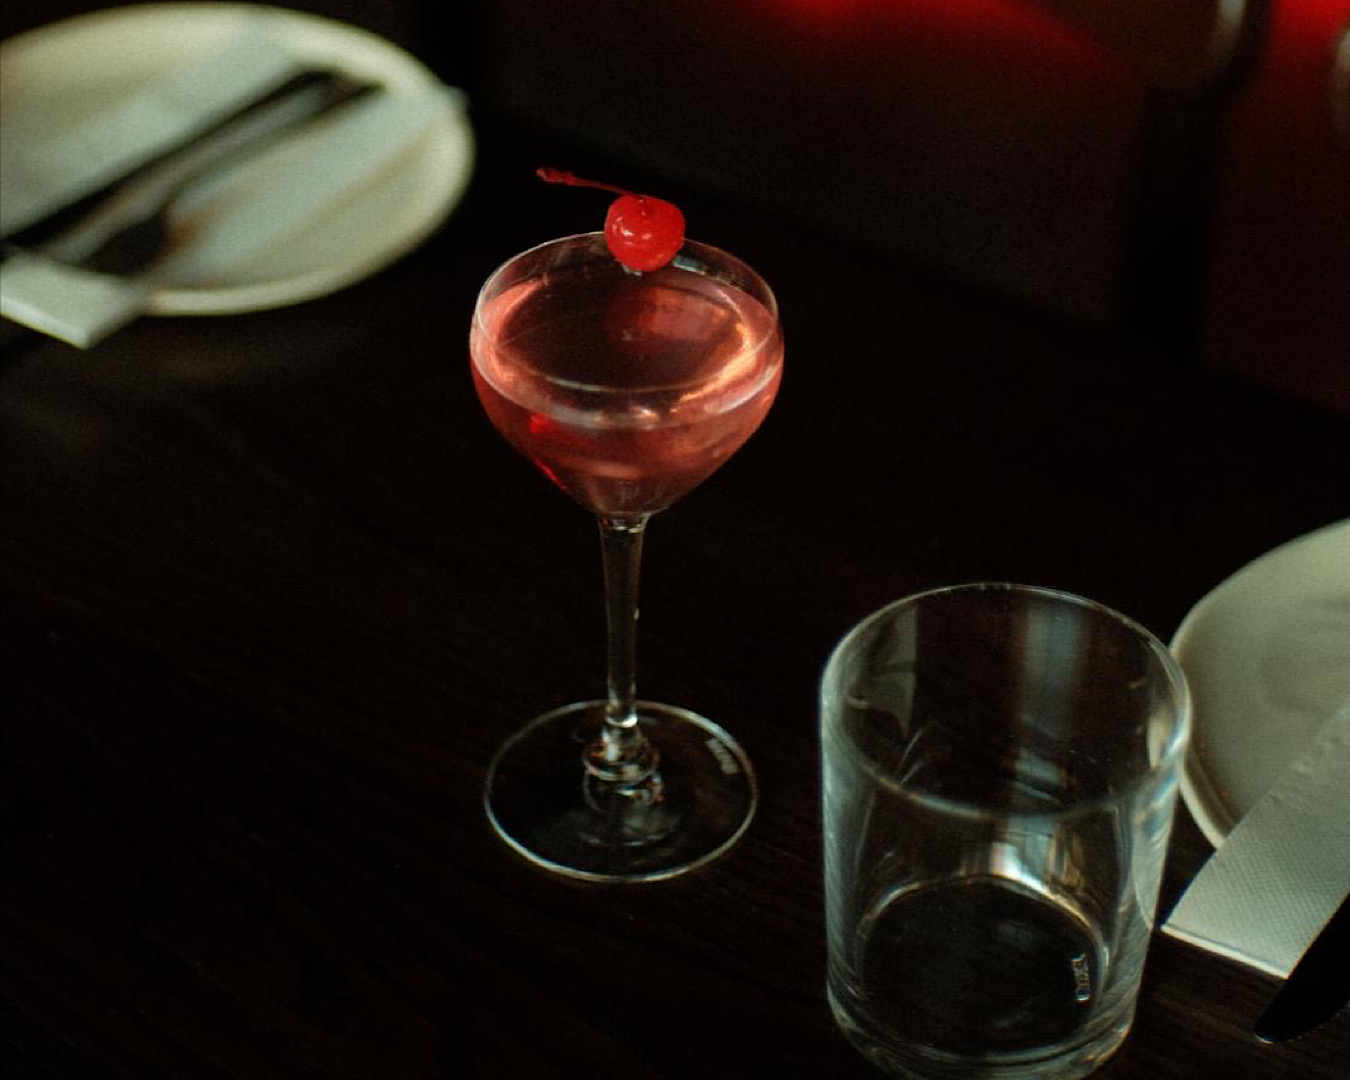 A dark space almost lit by an understated pink cocktail perfectly accented by a maraschino cherry.